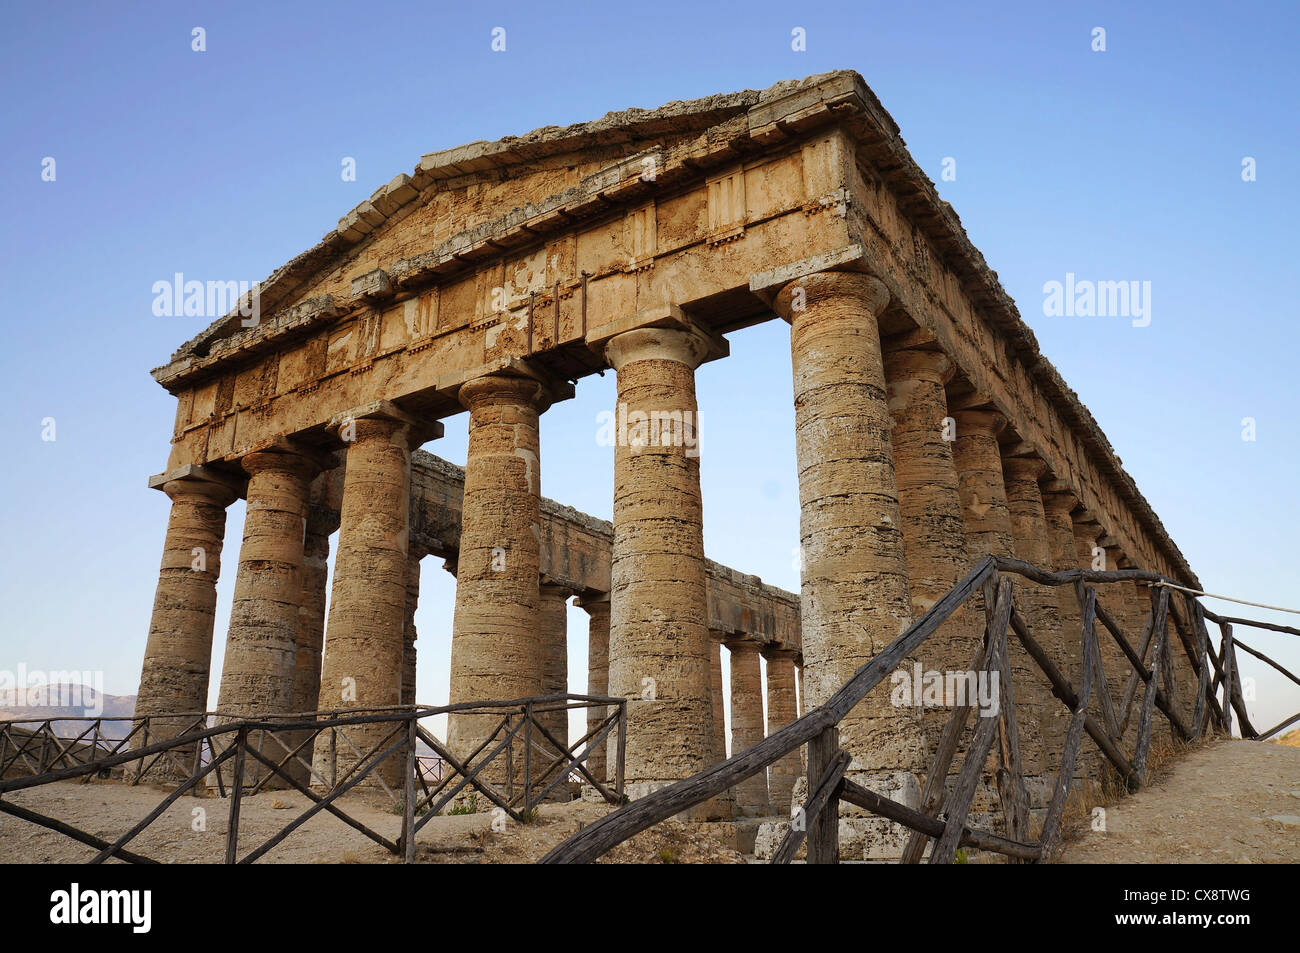 View of the monumental greek doric temple of Segesta in Sicily Stock Photo